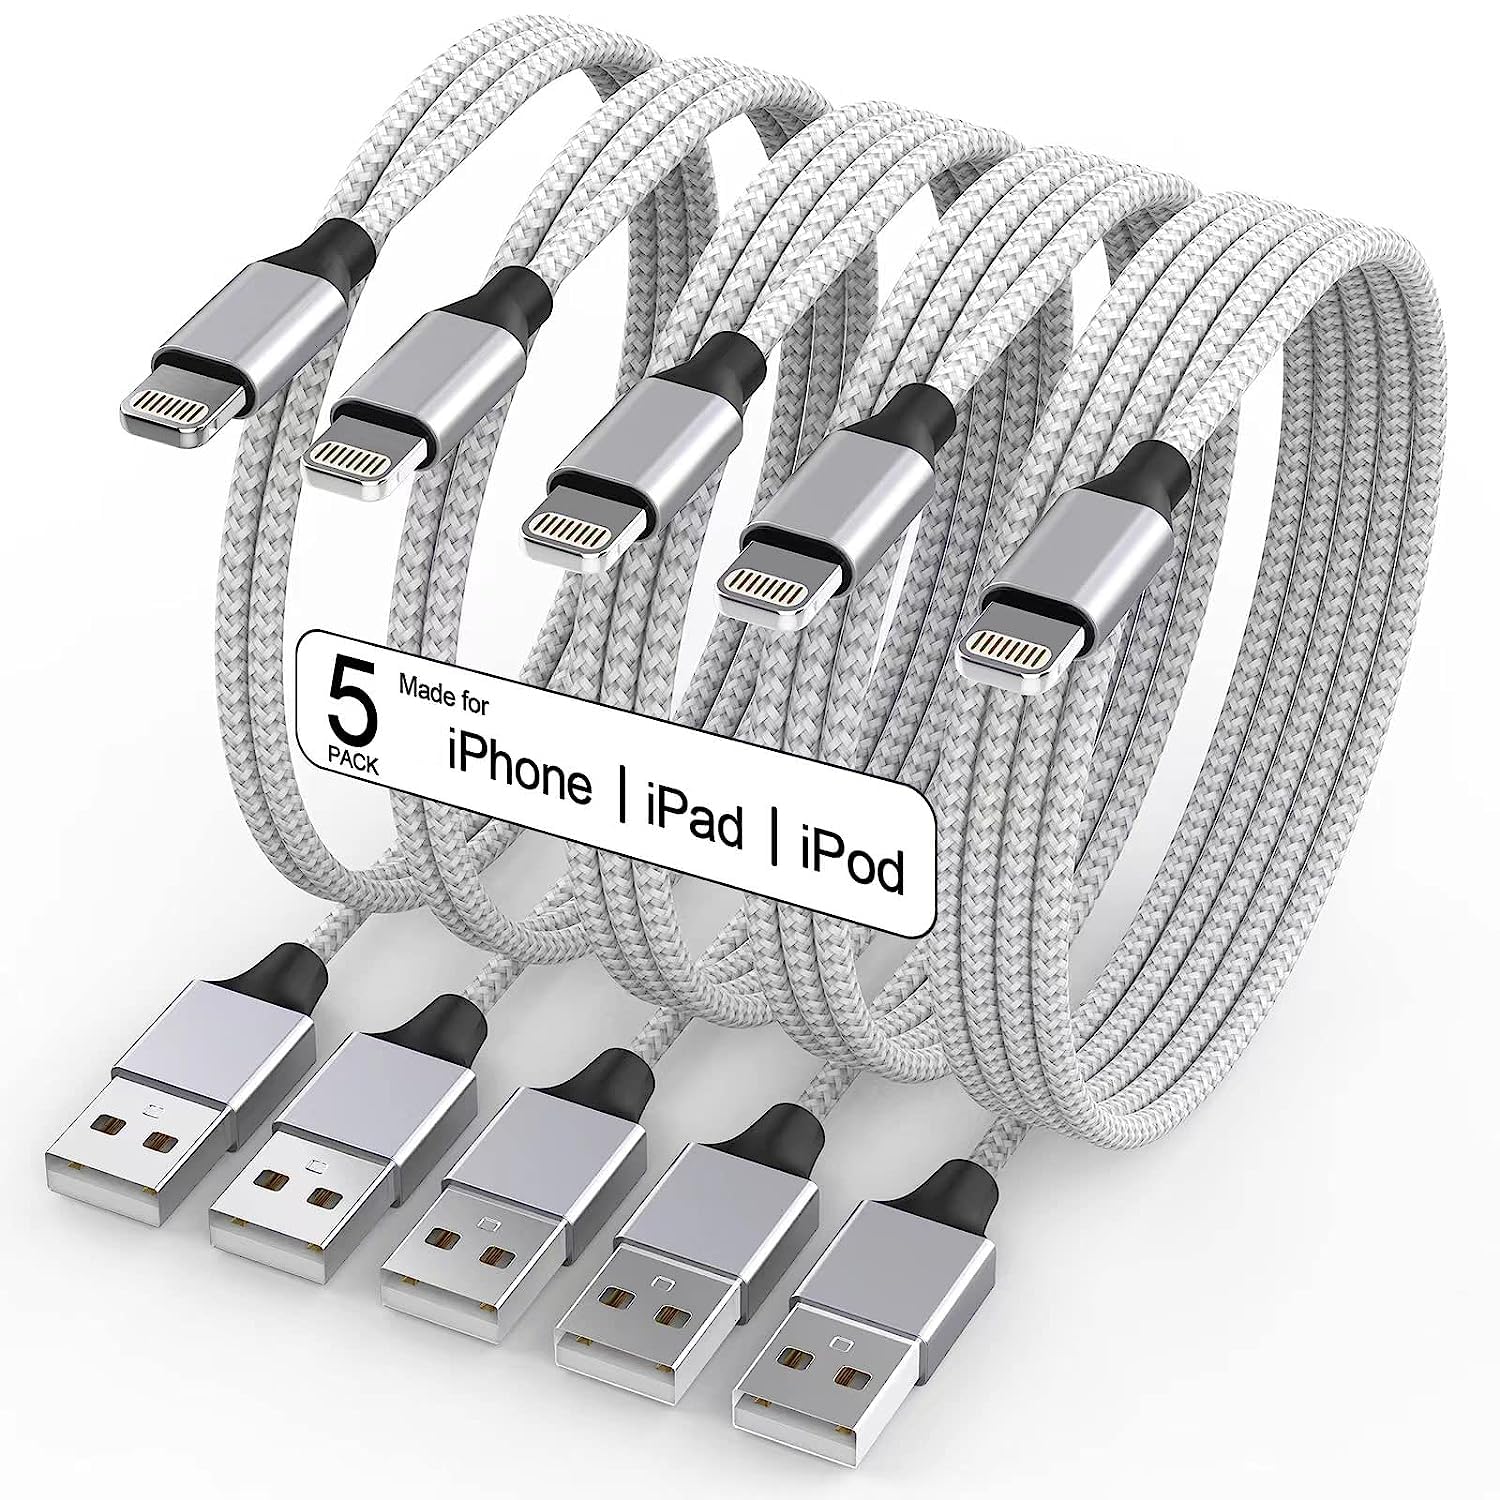 Image of MFi-Certified charging cable and iPhone X